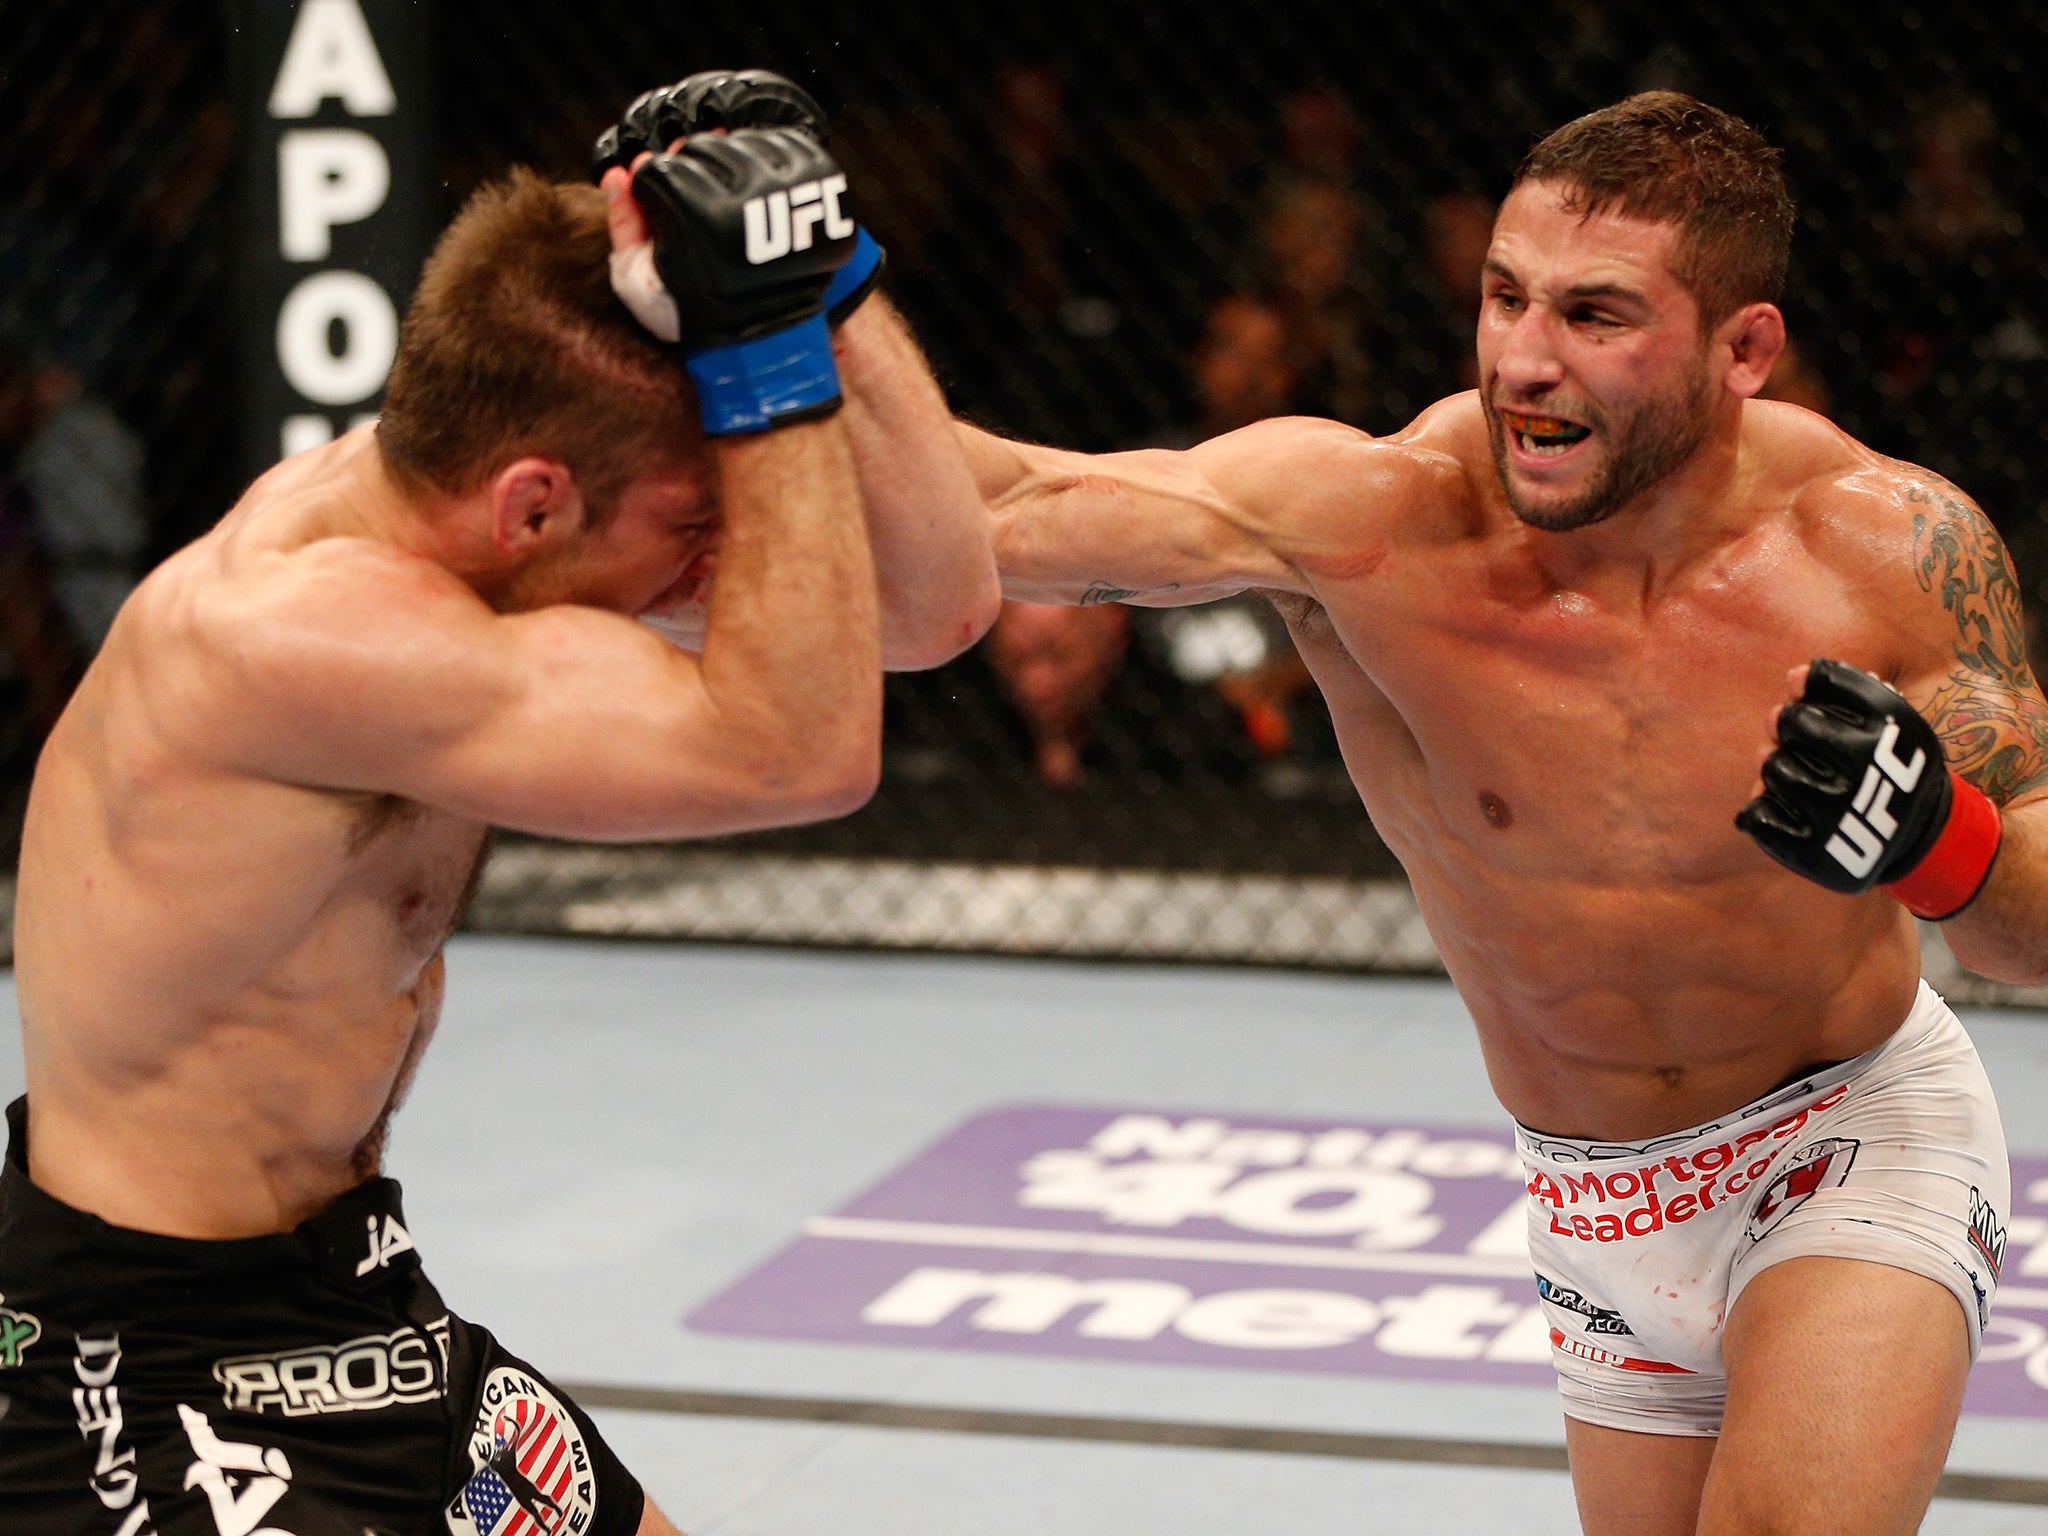 Chad Mendes (right) in action